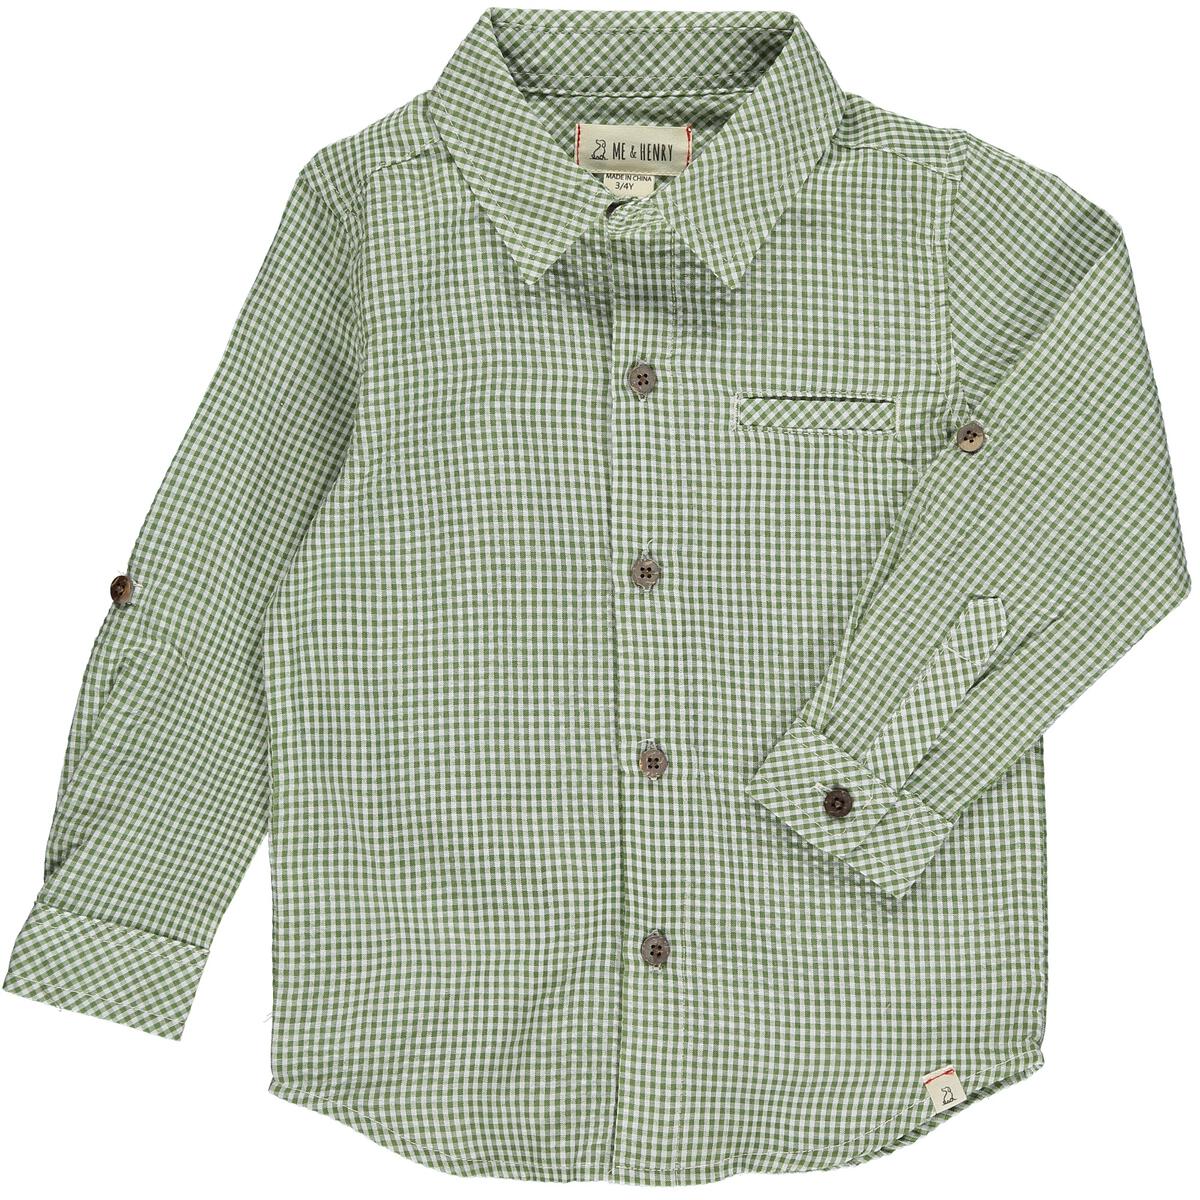 Me & Henry Atwood Woven Button Shirt - Green/White Mini Check-ME & HENRY-Little Giant Kidz